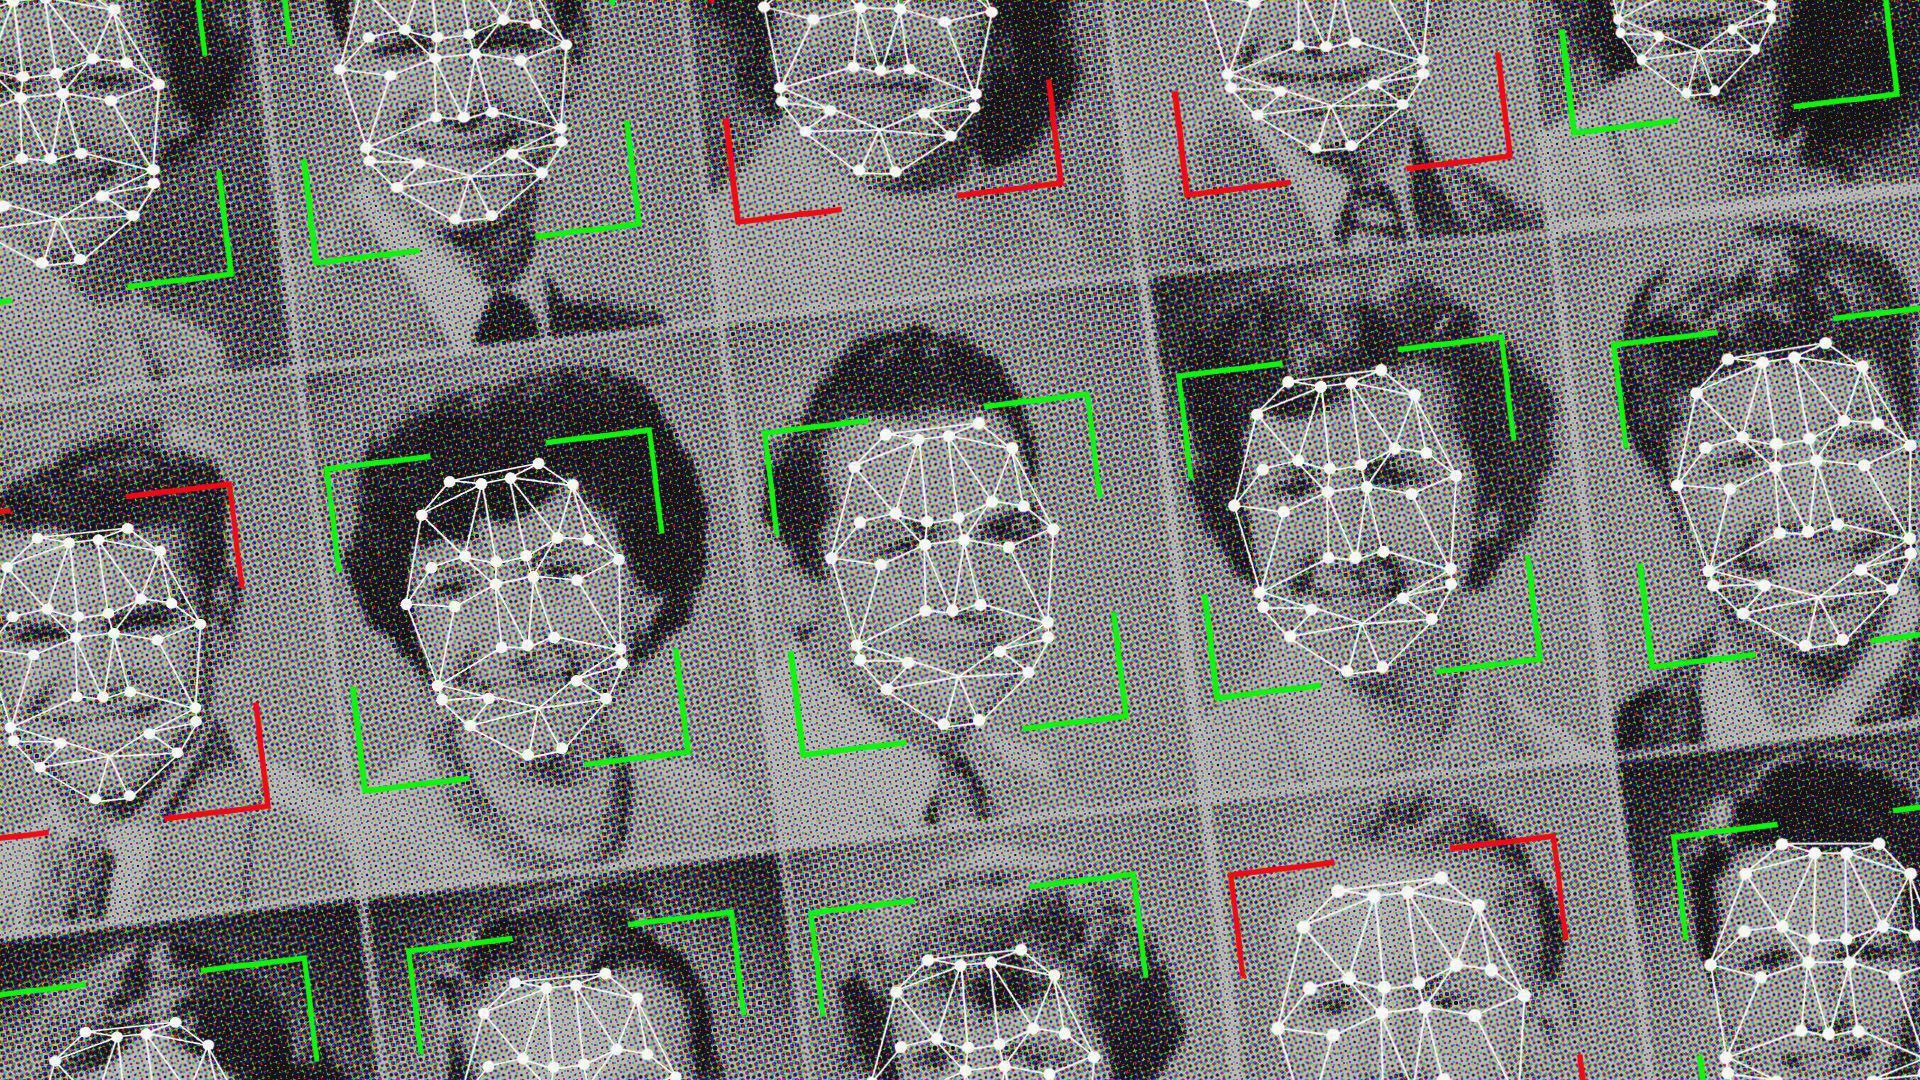 An illustration of facial recognition technology in action